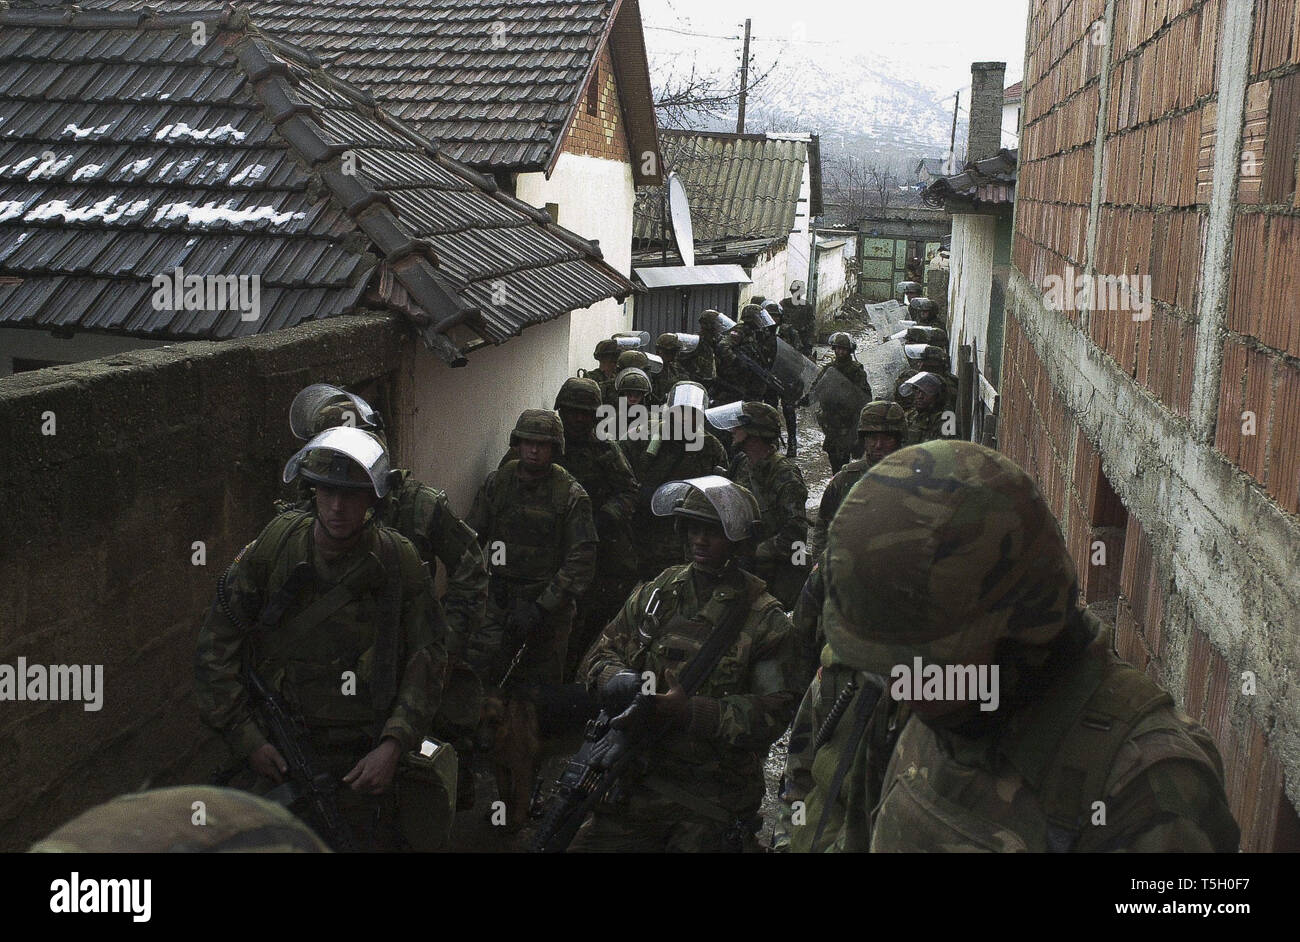 February 21, 2000 - Mitrovica, Kosovo, Yugoslavia - U.S. soldiers wait to head down a street in the Little Bosnia neighborhood of northern Mitrovica, Kosovo, Yugoslavia, to search for weapons caches in a joint operation with the French military Feb. 21, 2000. (Credit Image: © Bill Putnam/ZUMA Wire) Stock Photo